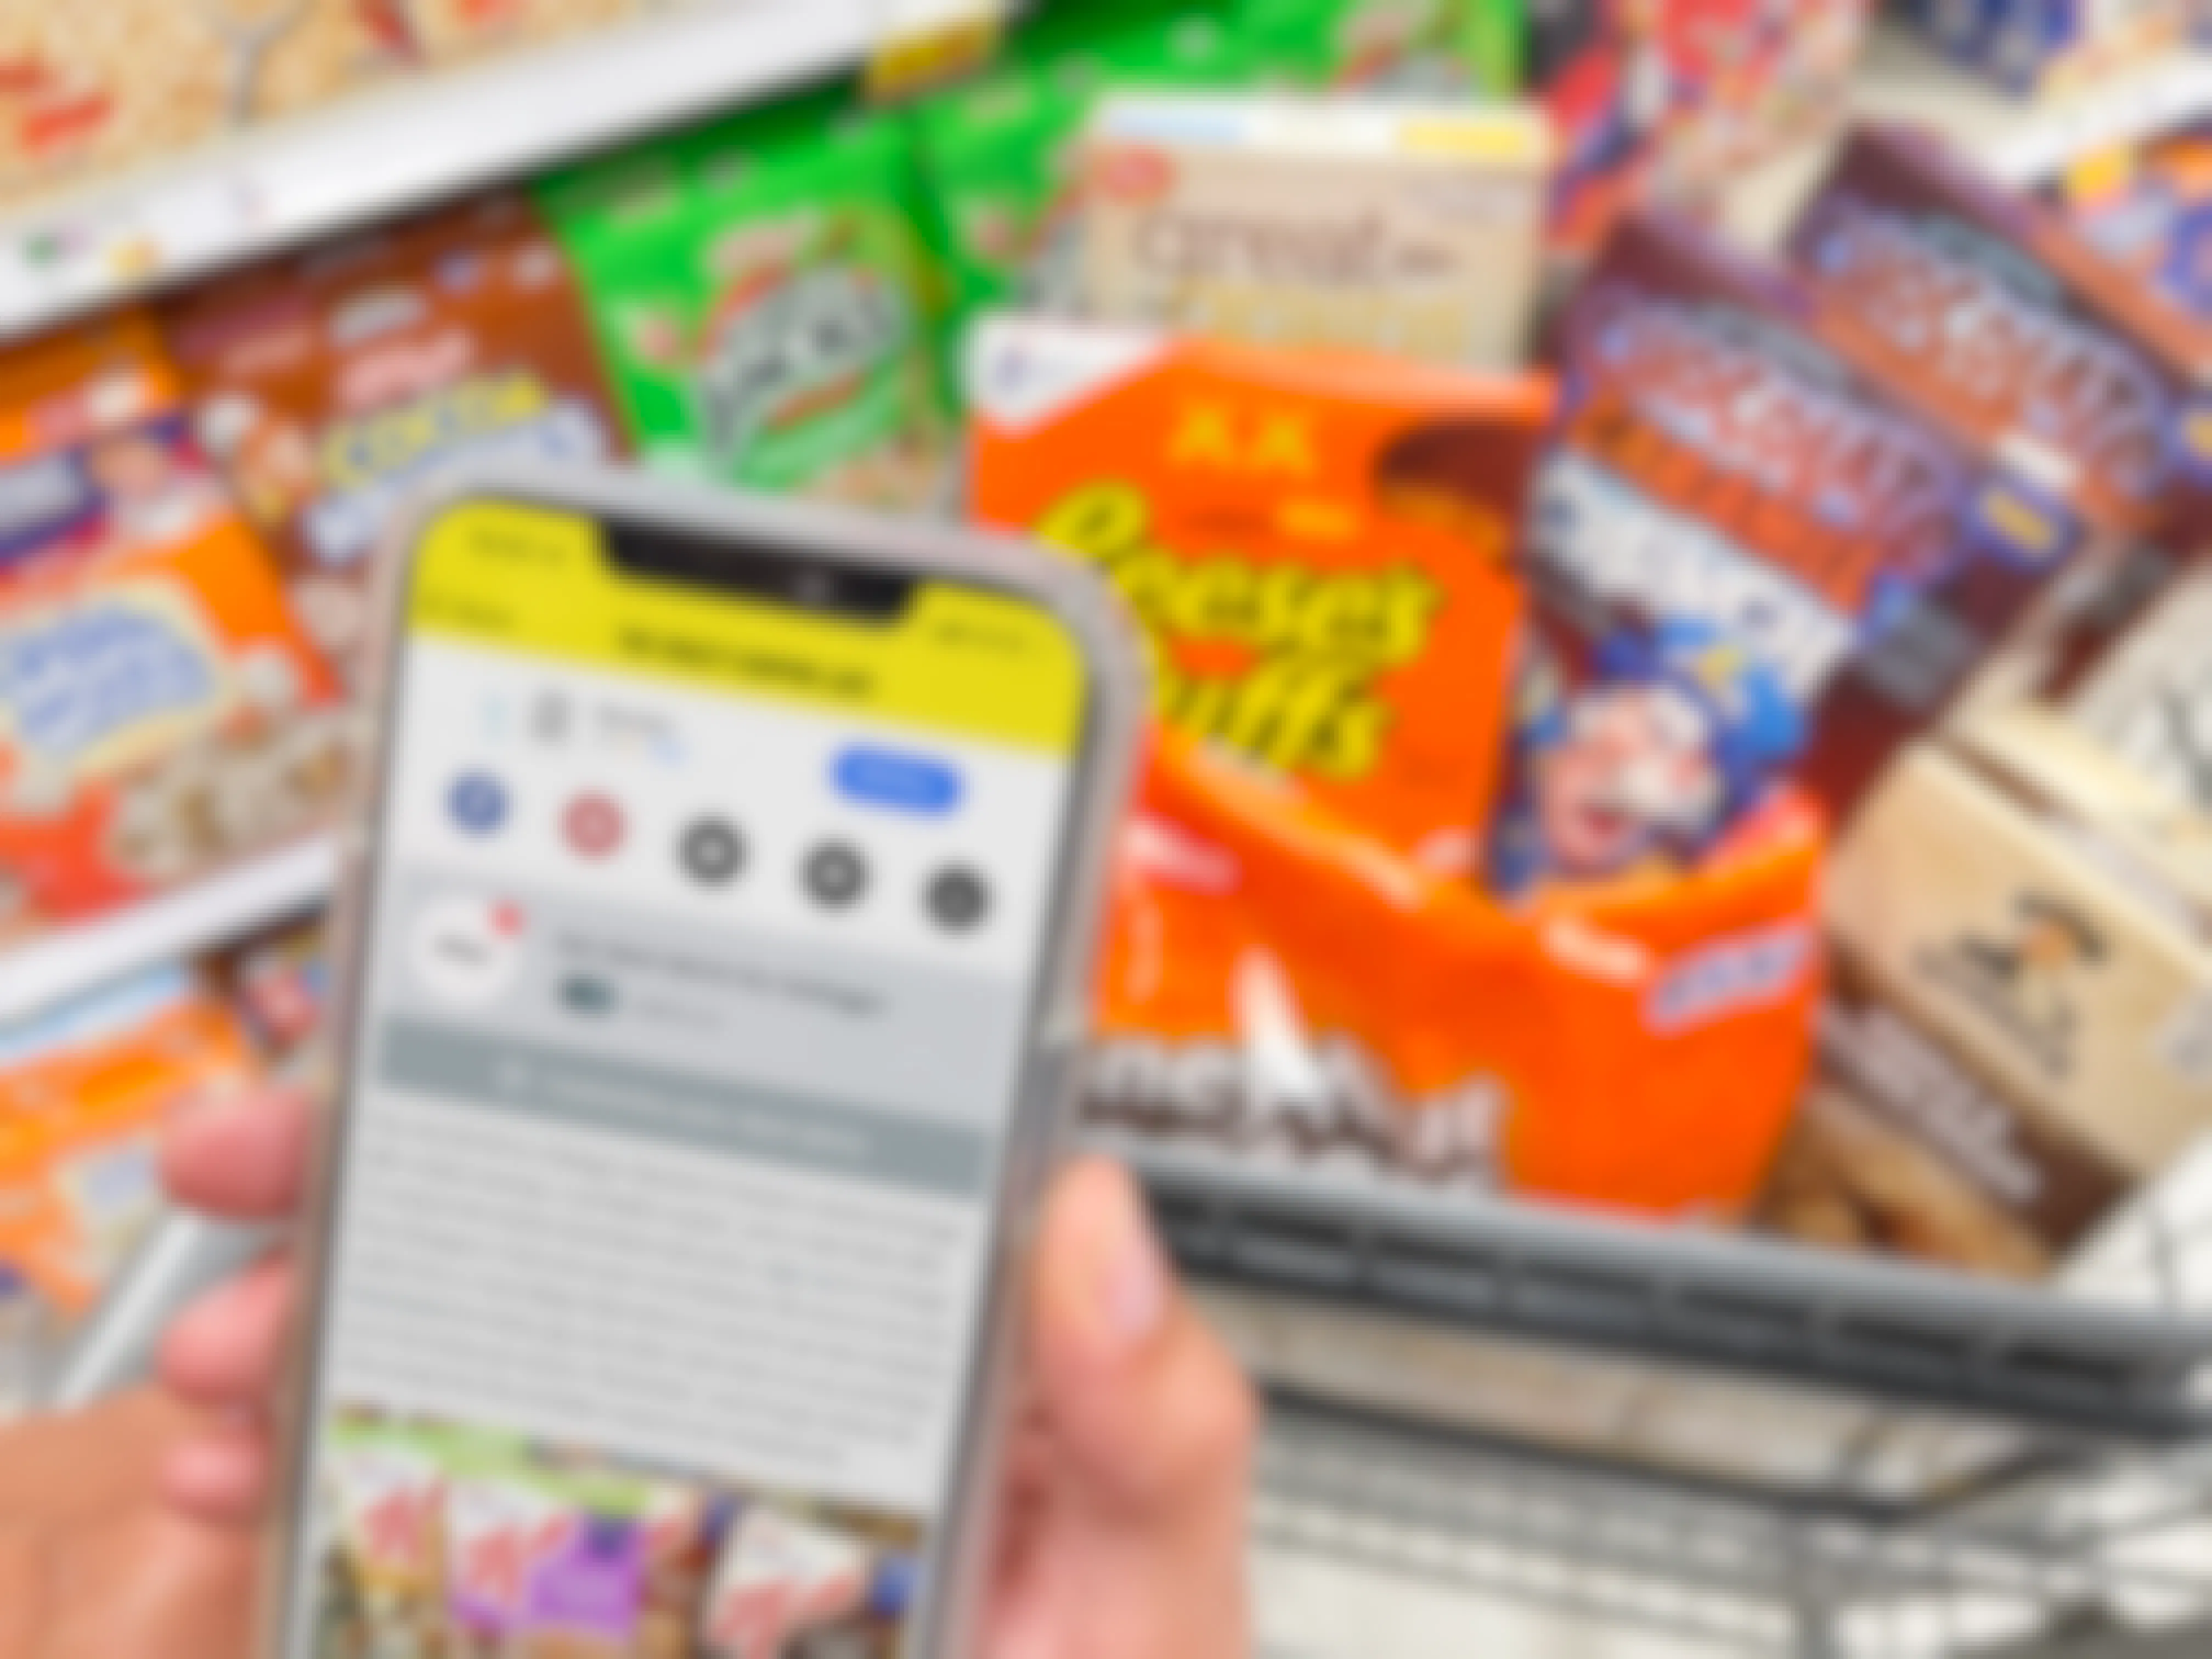 A person's hand holding up an iPhone displaying the Krazy Coupon Lady mobile app in front of a shopping cart full of groceries.